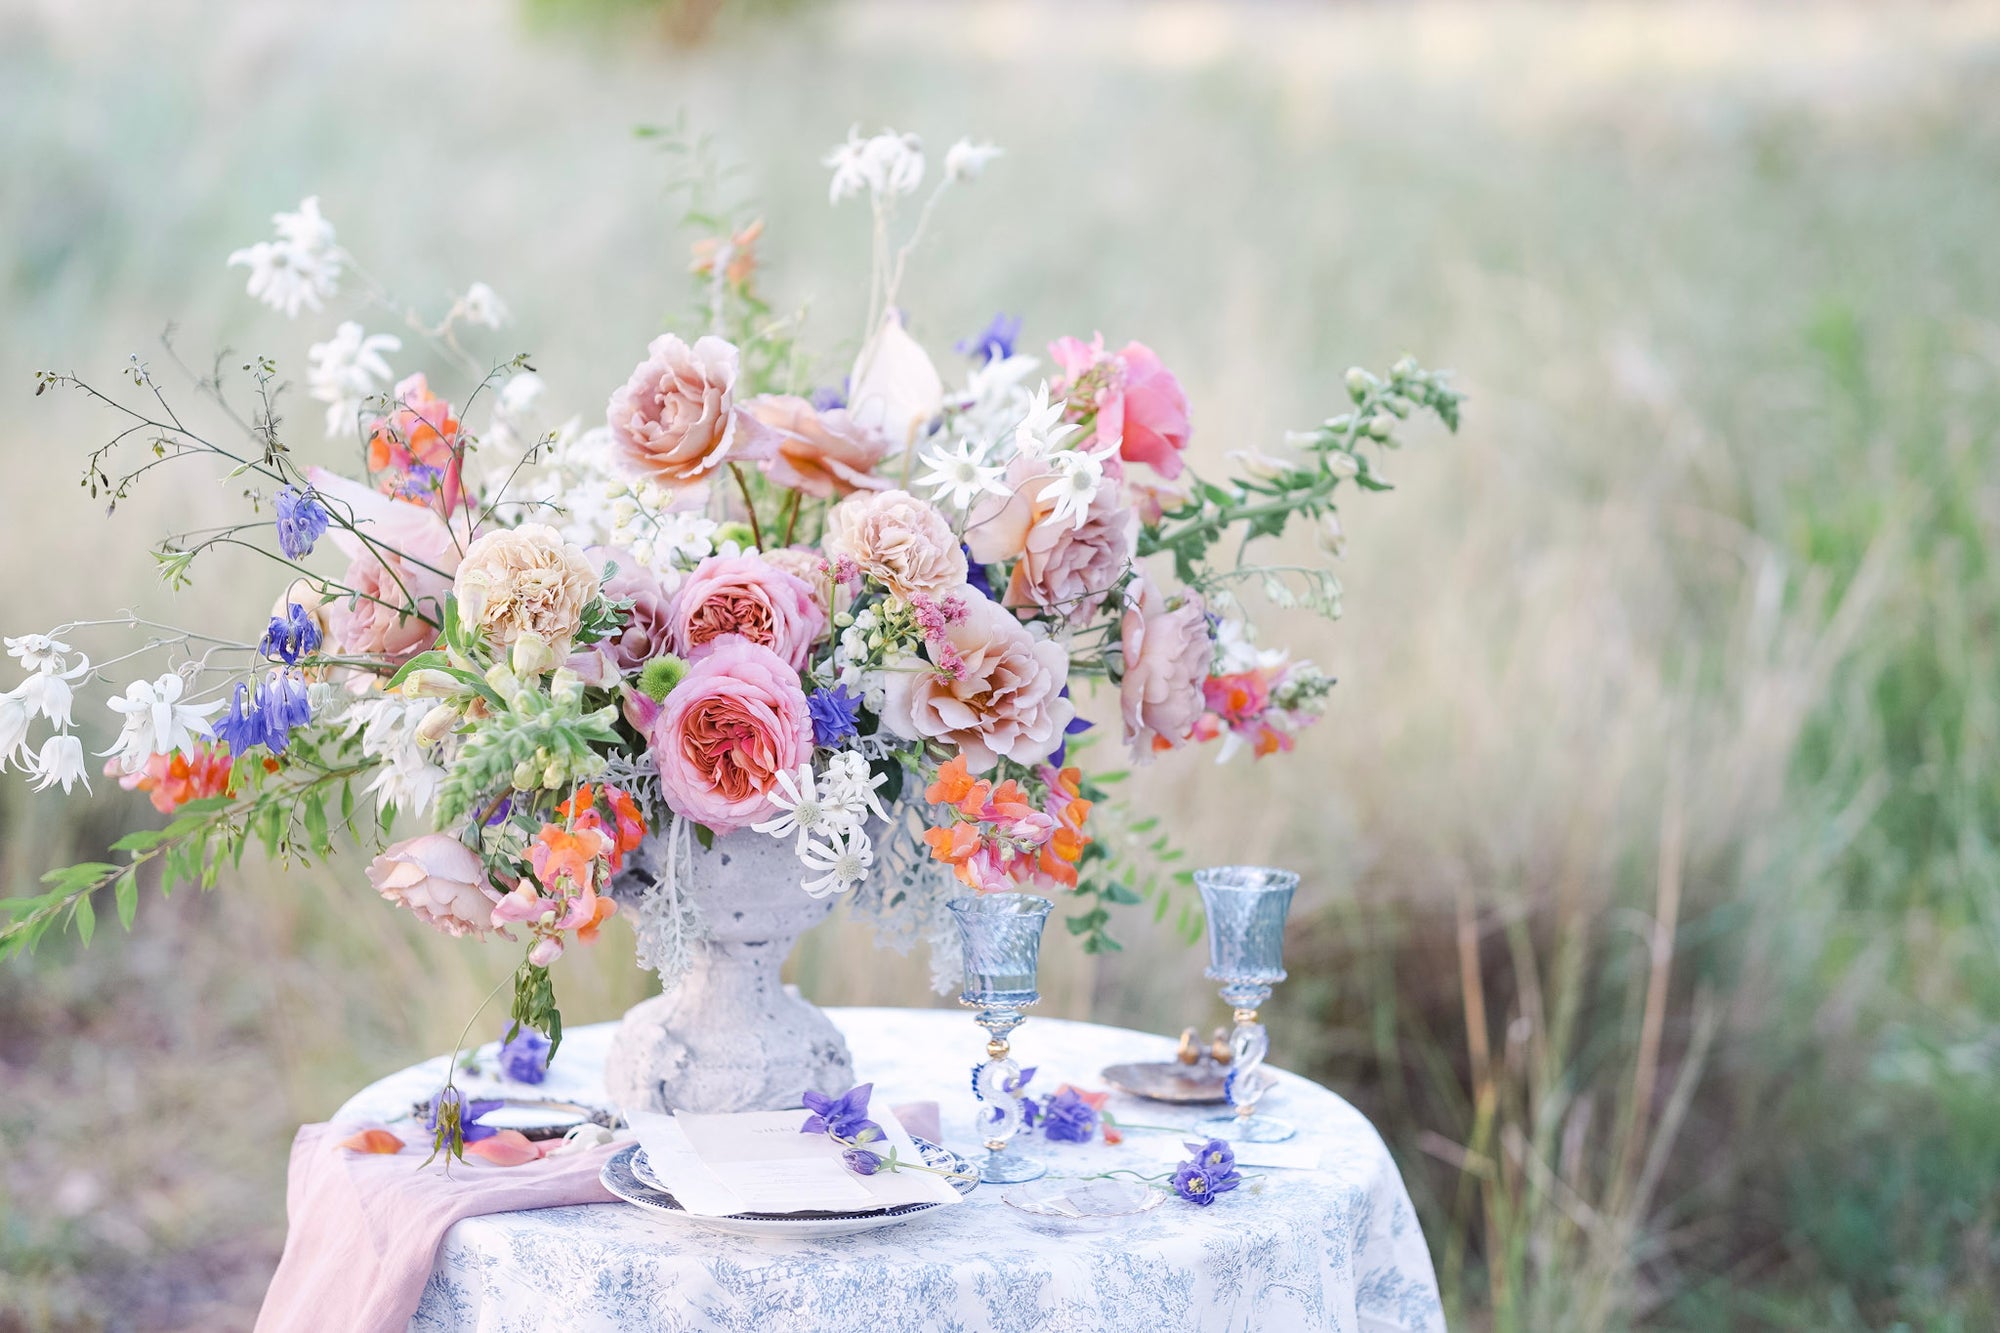 Flower arranging workshop Sydney with fresh and dried flowers